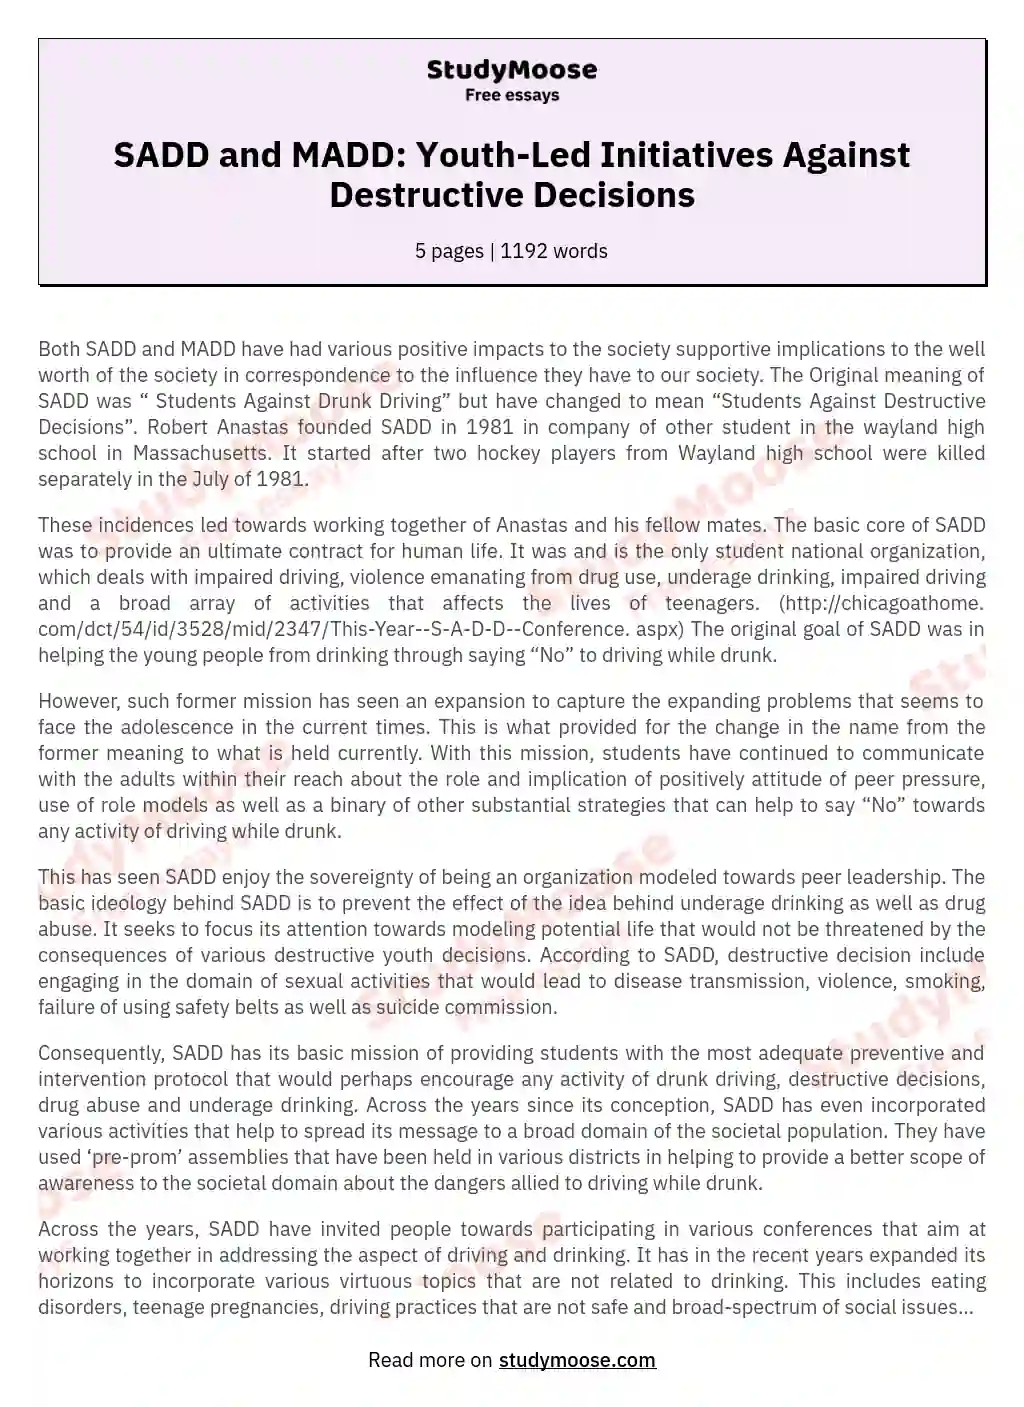 SADD and MADD: Youth-Led Initiatives Against Destructive Decisions essay